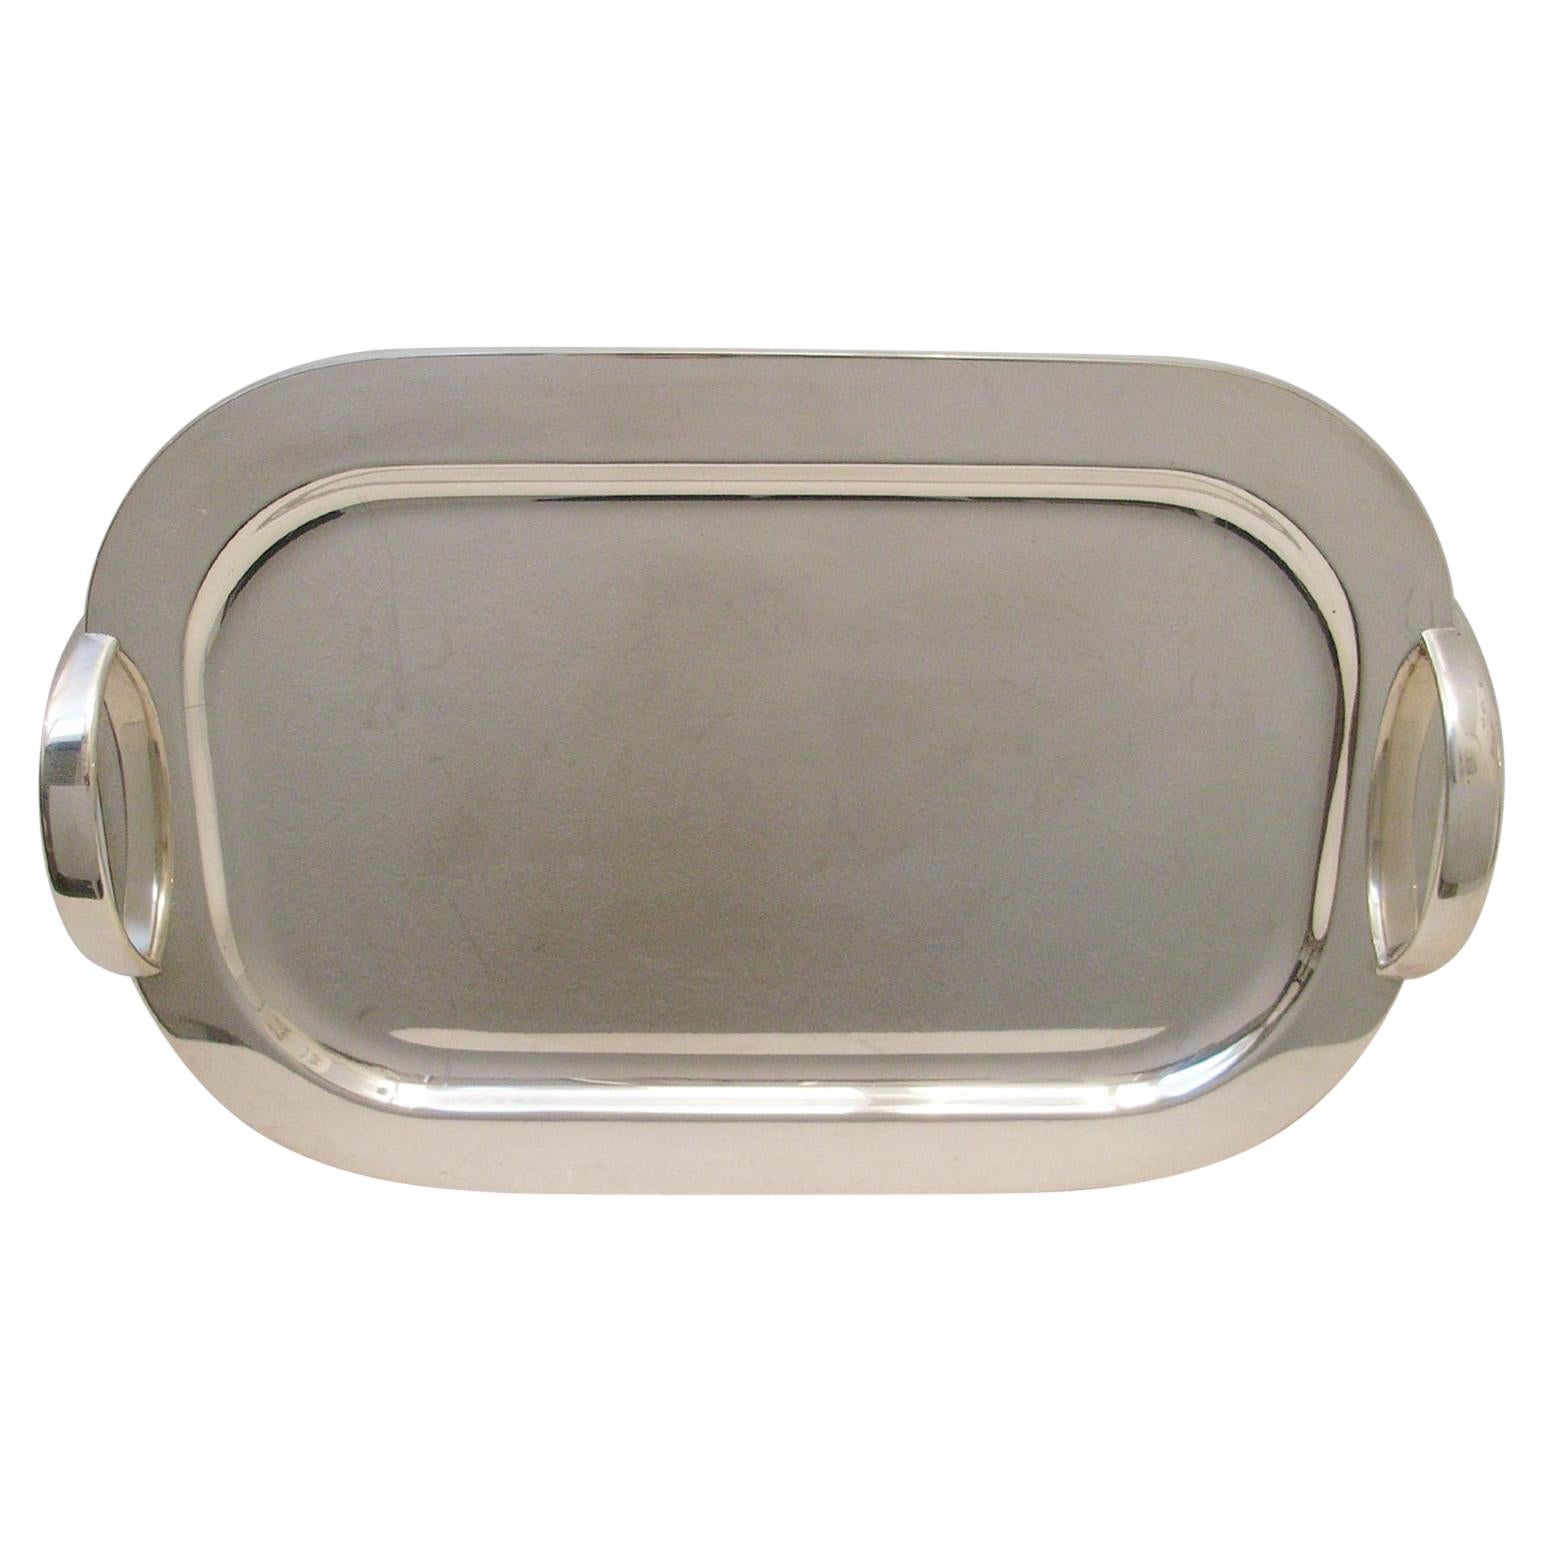 Mid-Century Modern Silver Plated Tray by Lino Sabatini